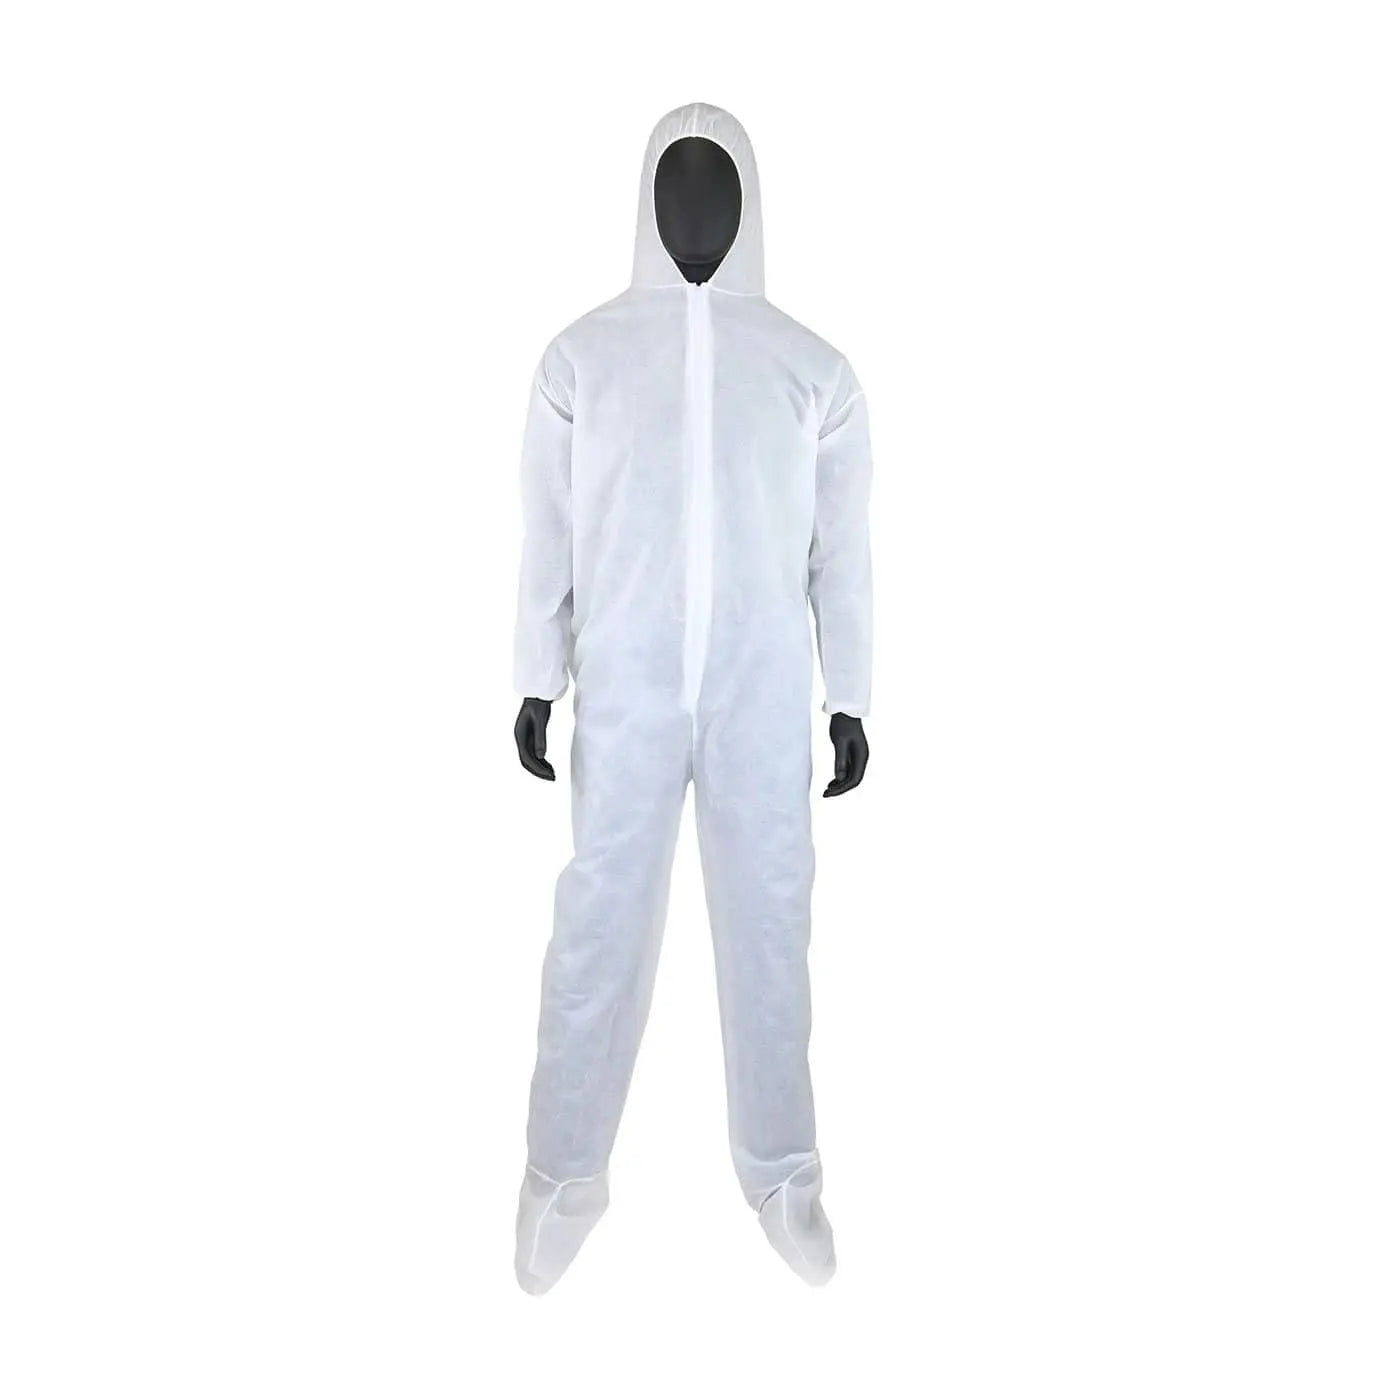 PIP - Disposable Coveralls - Elastic Cuff, Elastic Ankle Style, Polyethylene/Polypropylene Material, Zipper Front Closure, White,